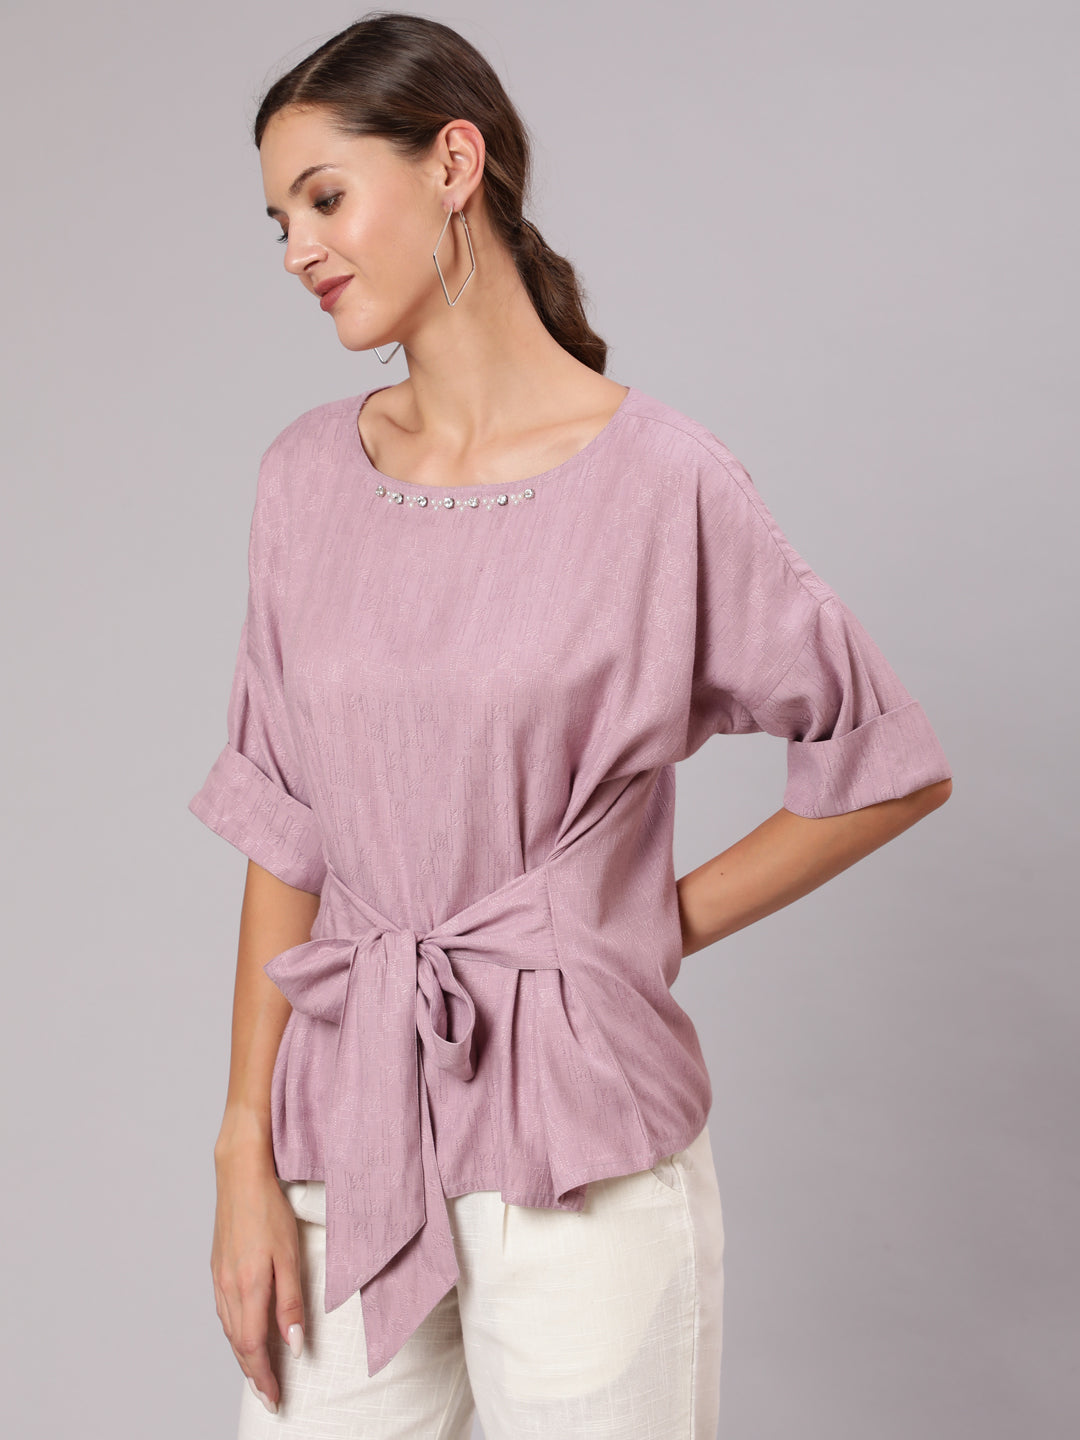 A Mauve Color Self Weaved Embellished Top With Tie-Up At The Waist And Extended Sleeves Top With Cotton White Flared Pants